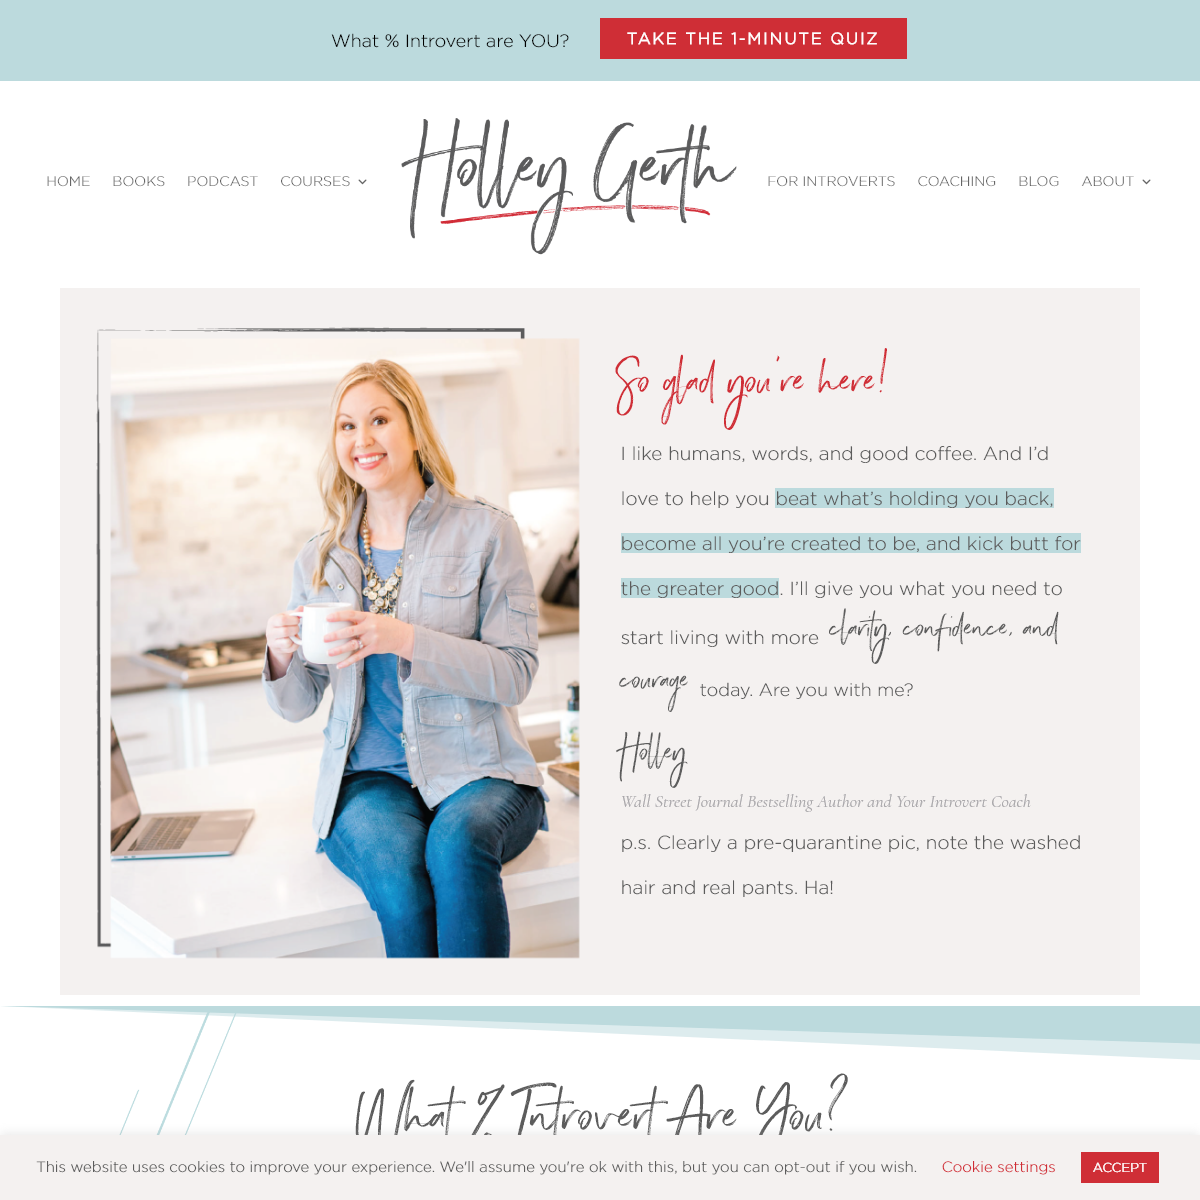 A complete backup of holleygerth.com